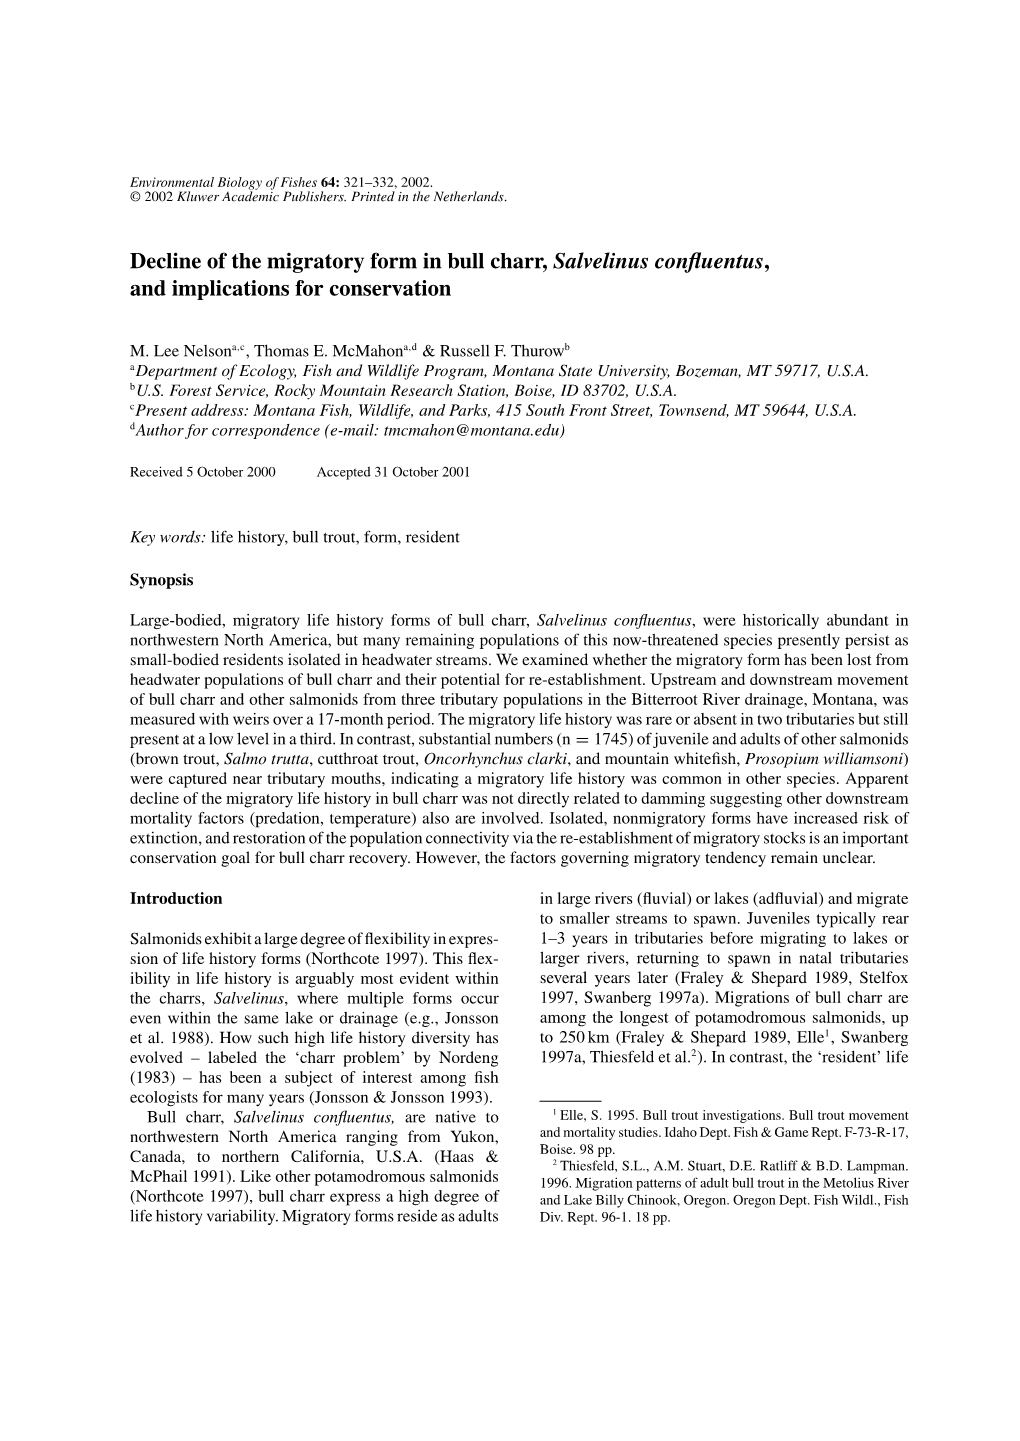 Decline of the Migratory Form of Bull Charr, Salvelinus Confluentus, And